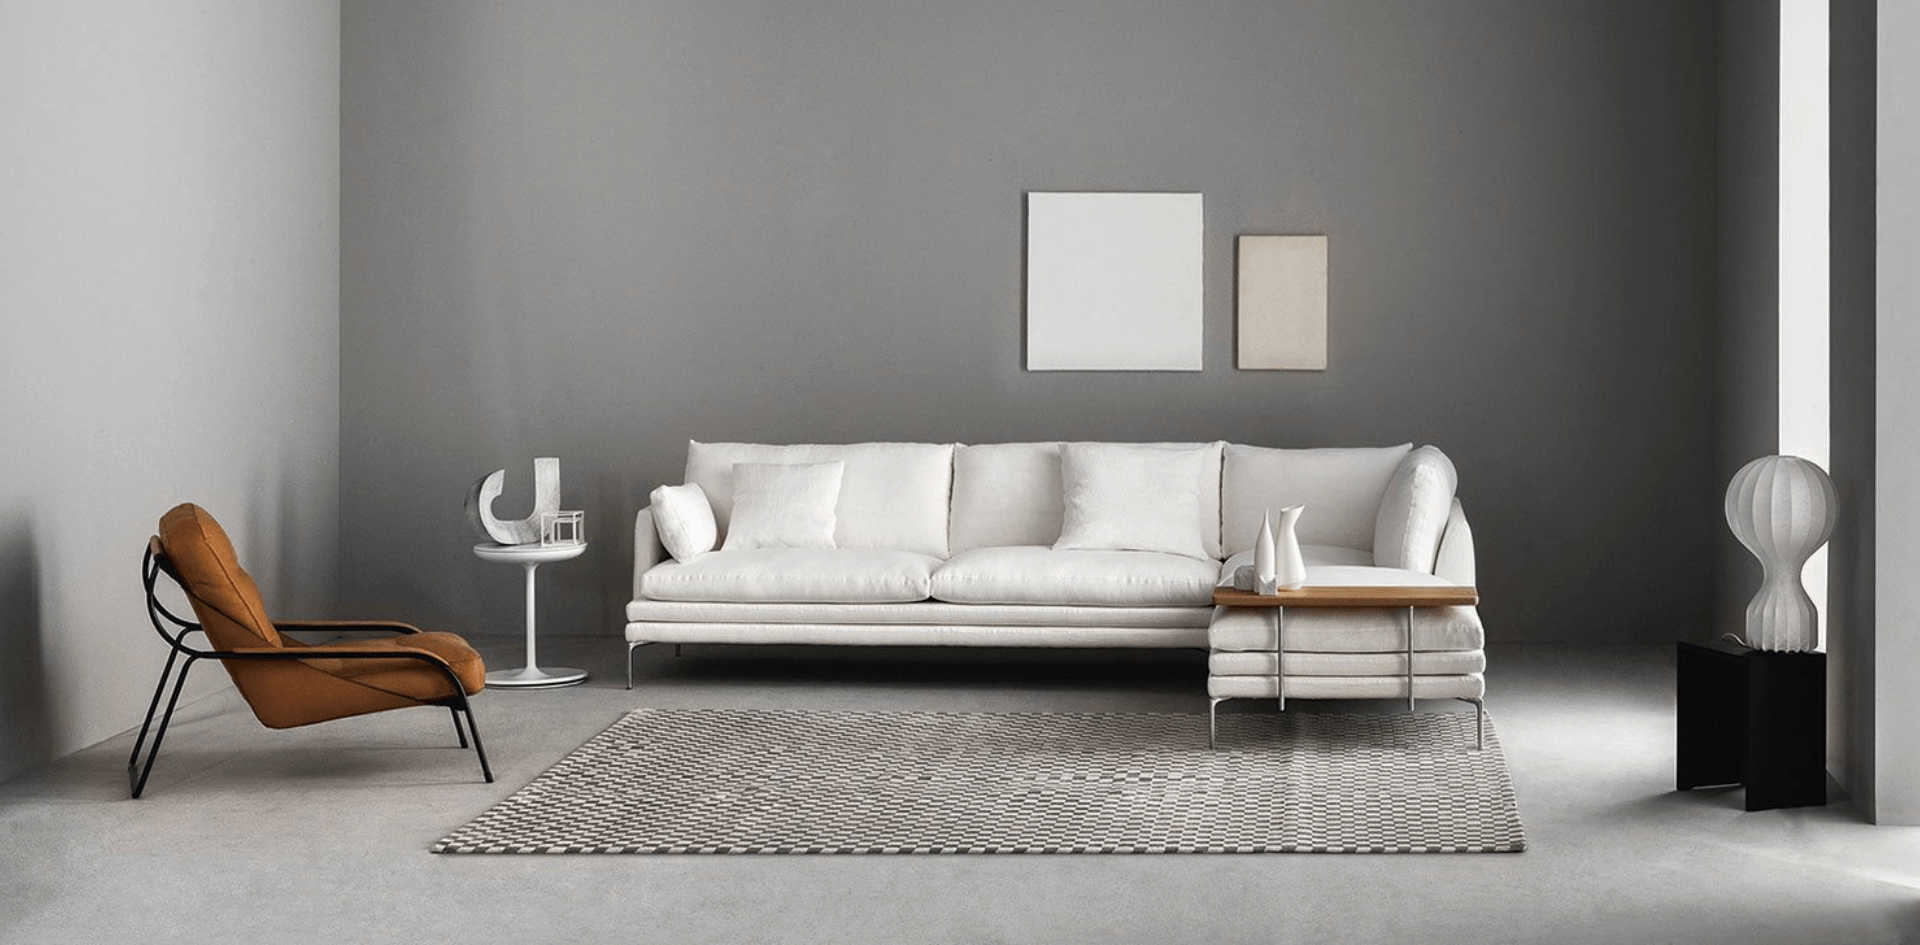 Online Furniture for Home and Contract | Sedie.Design